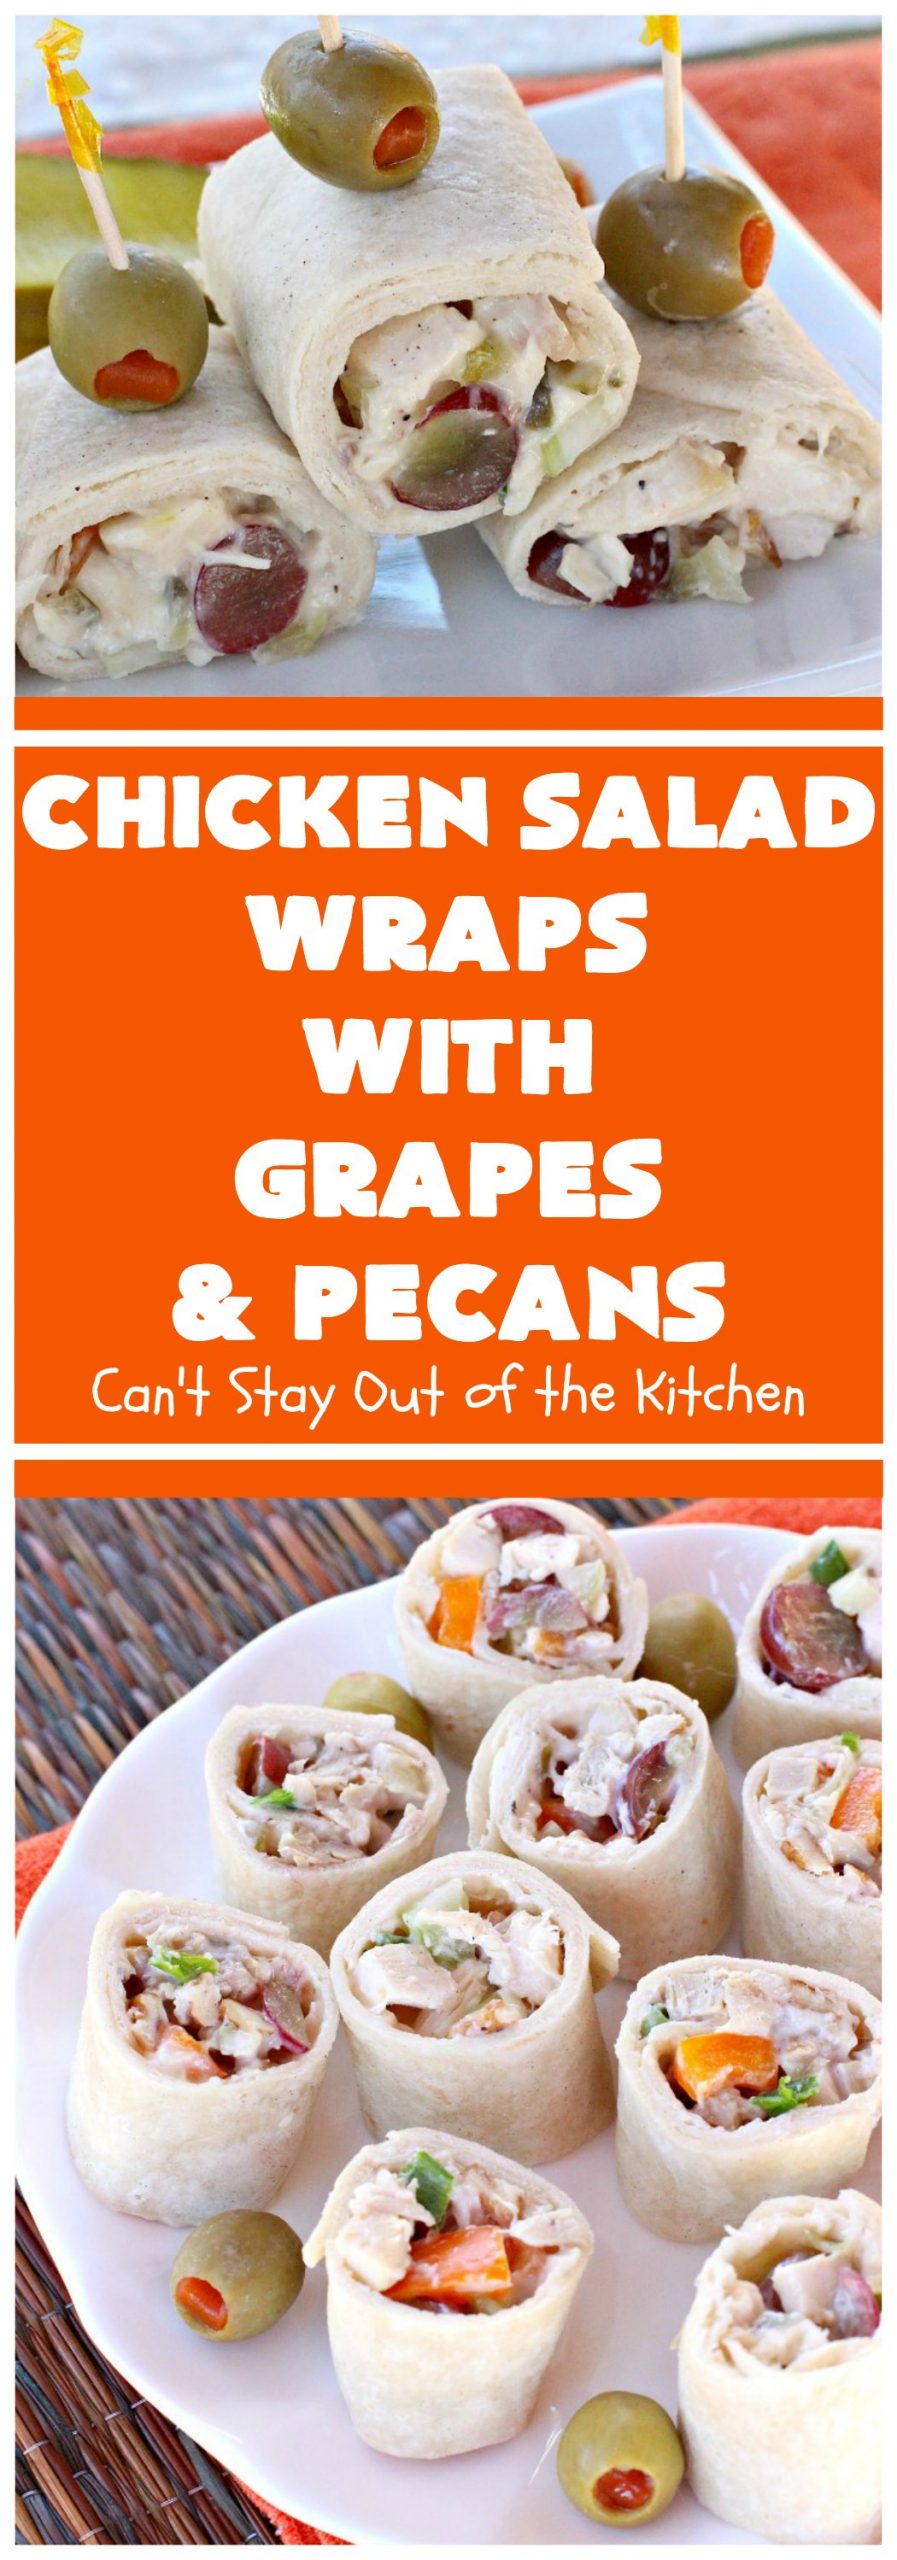 Chicken Salad Wraps with Grapes and Pecans | Can't Stay Out of the Kitchen